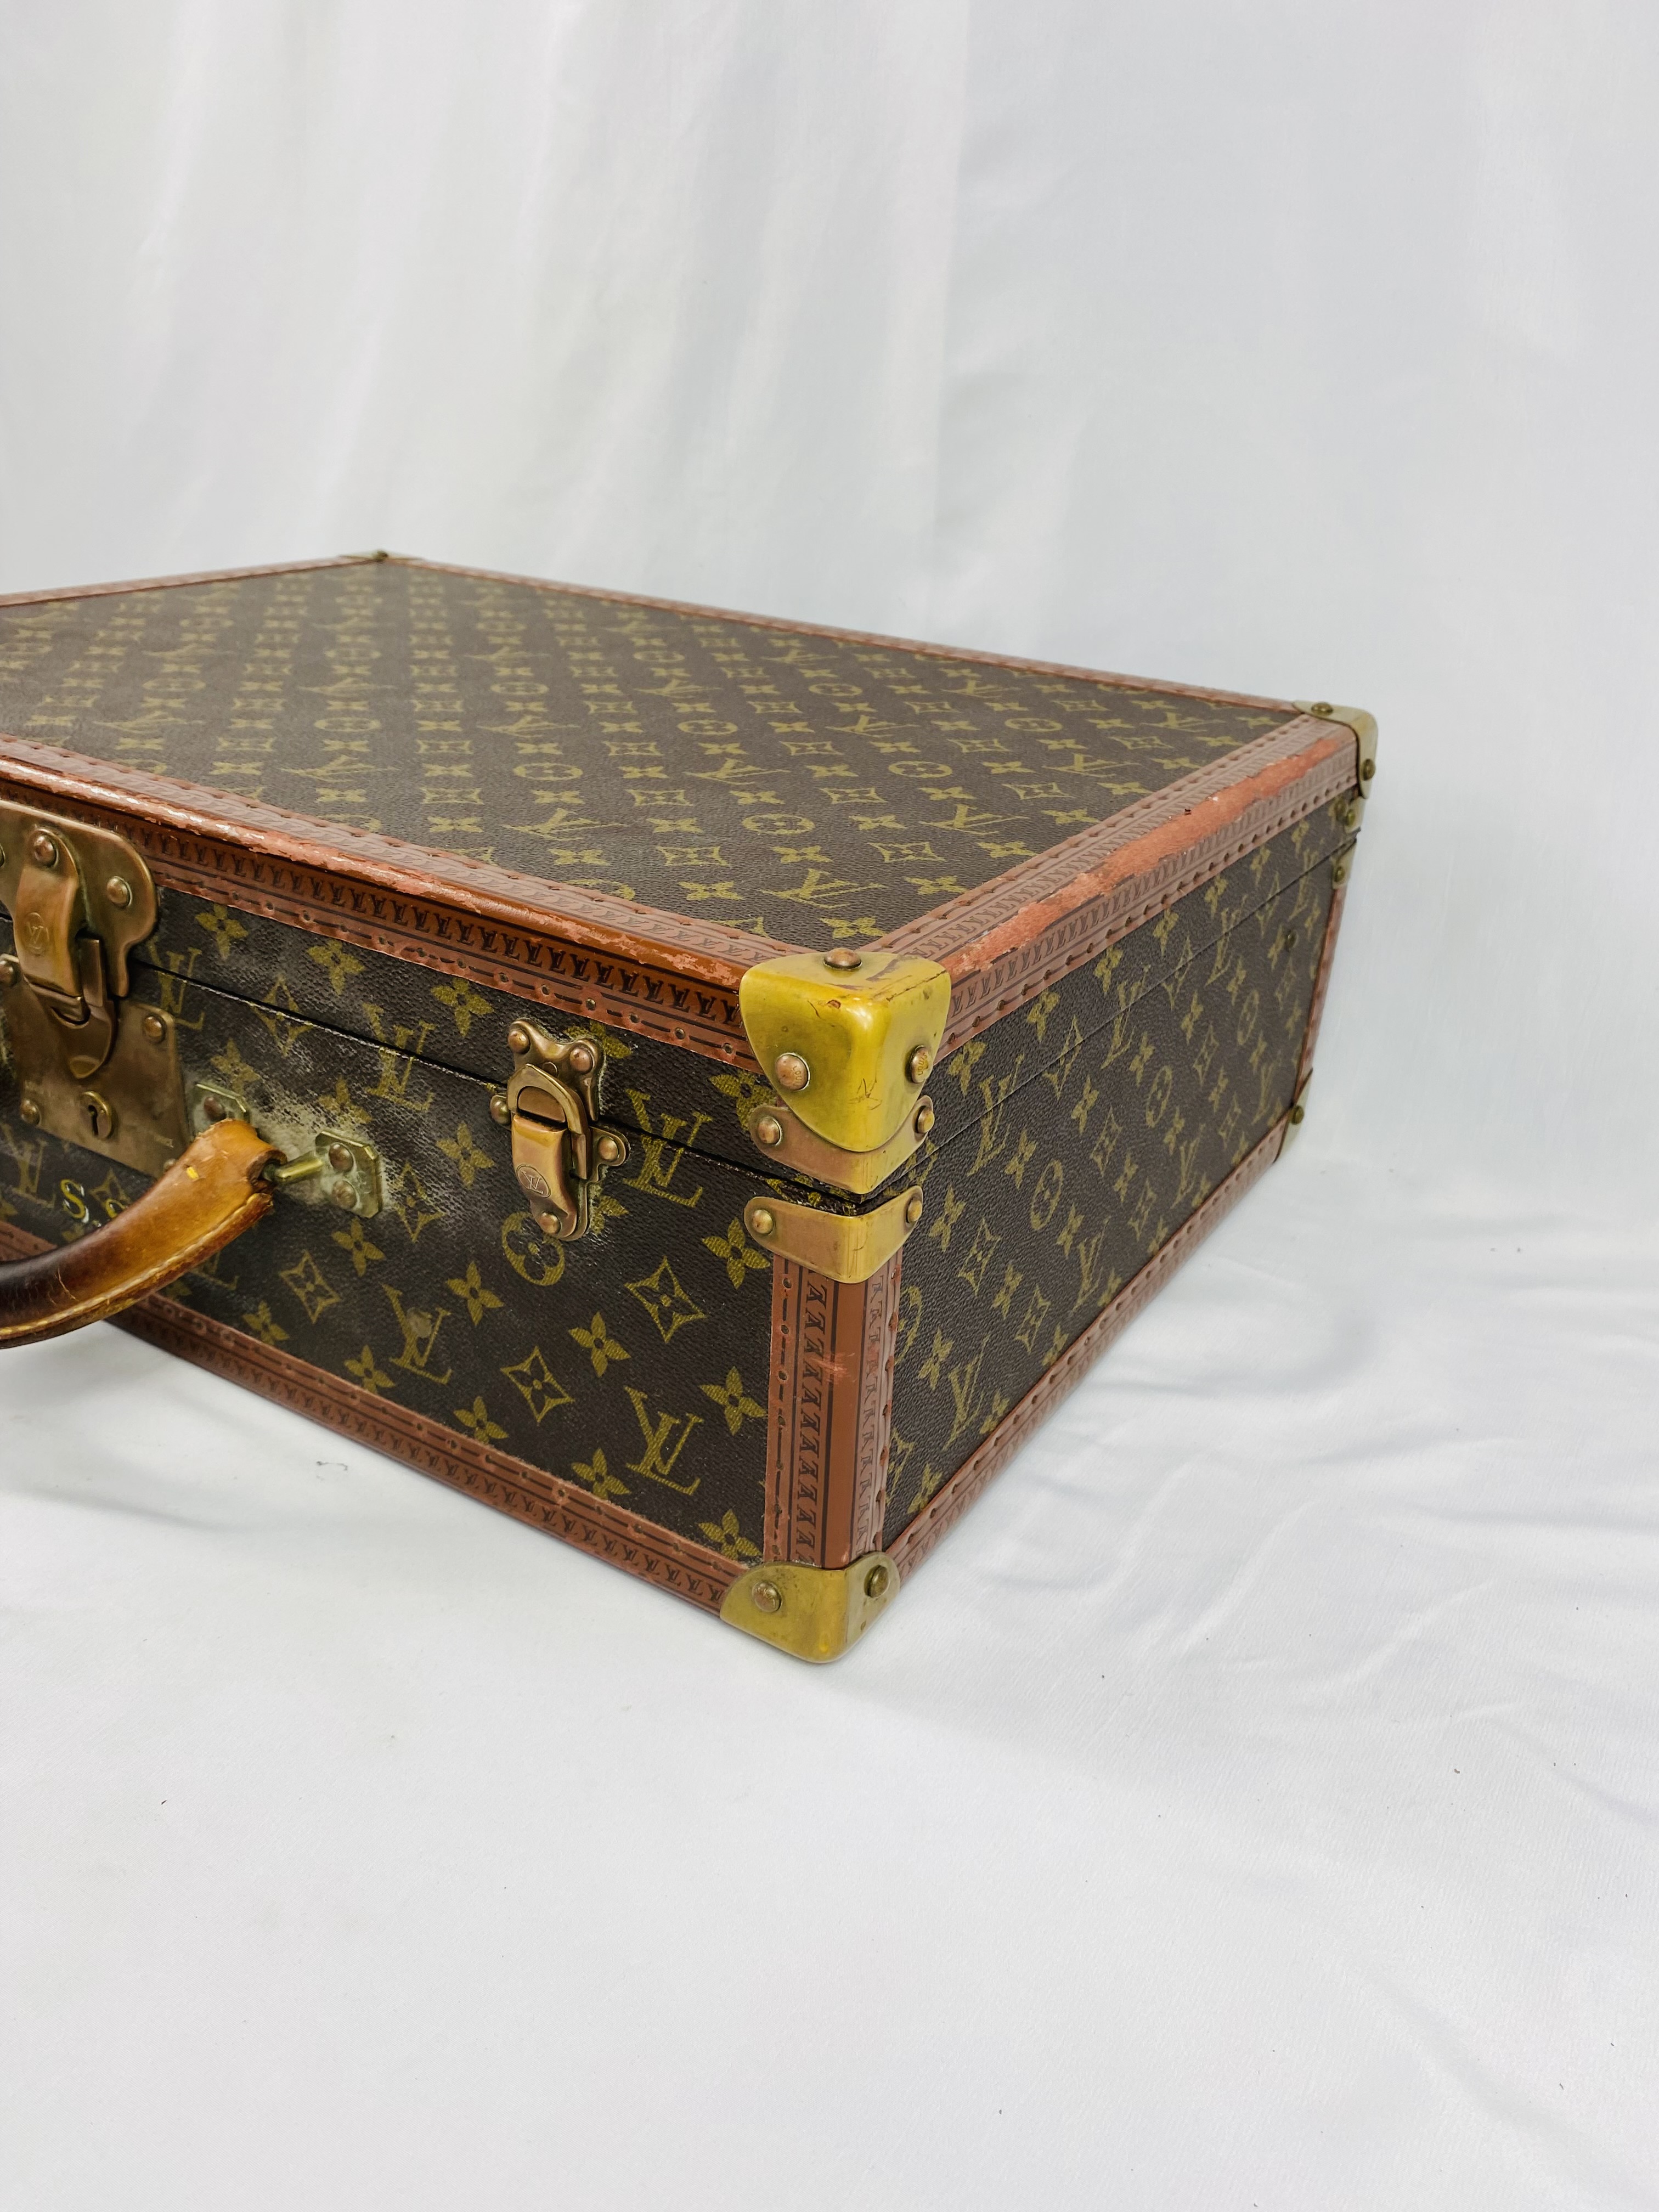 Louis Vuitton suitcase with protective cover - Image 4 of 10